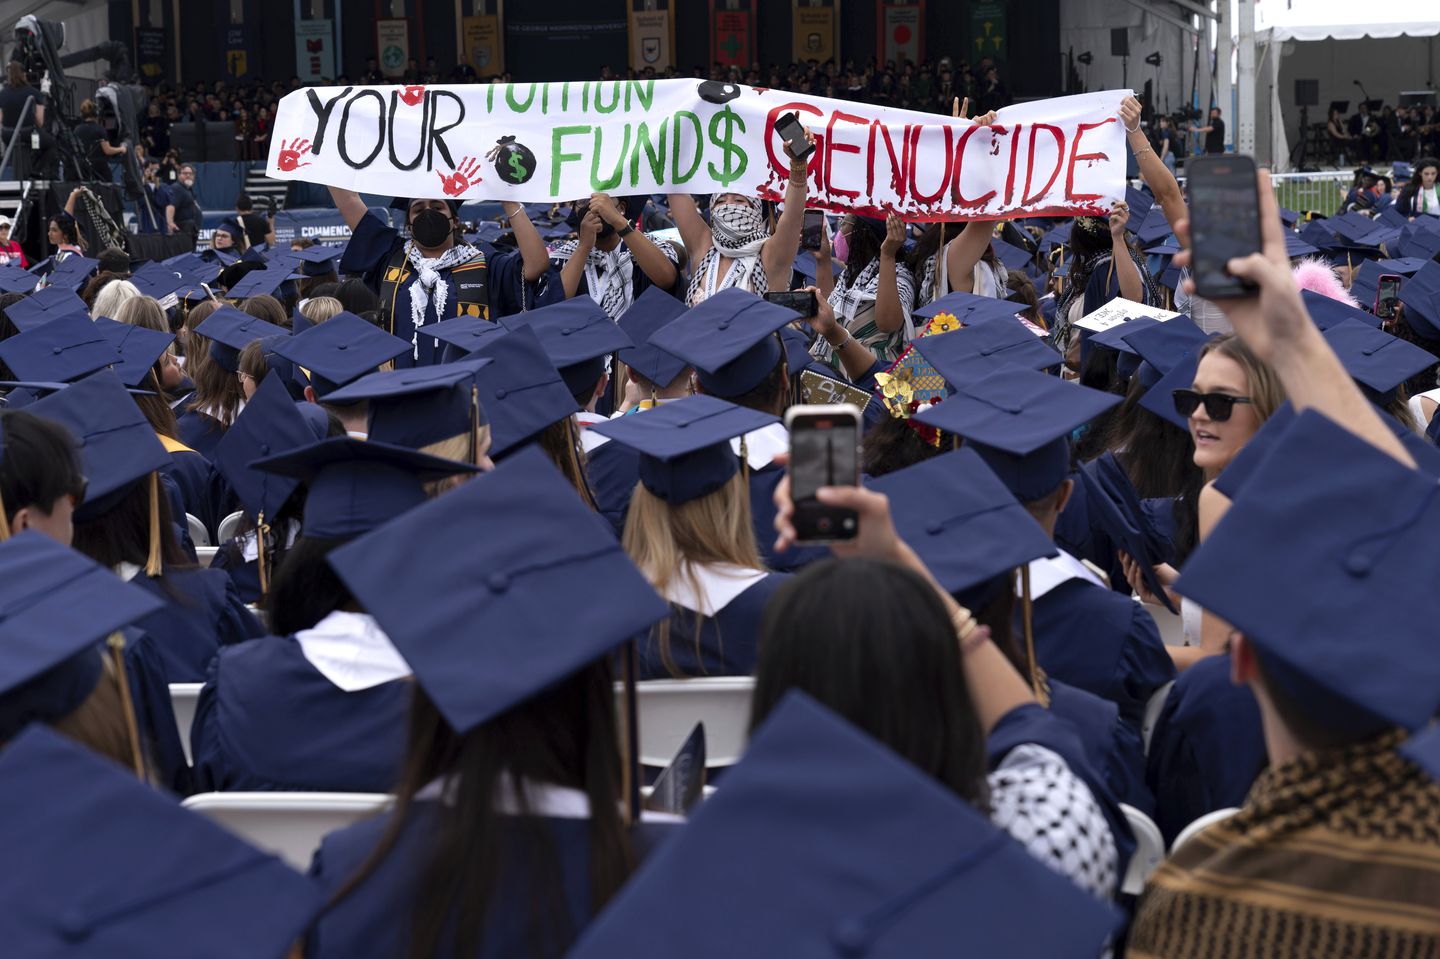 A protest at George Washington University's commencement ceremony on May 19.